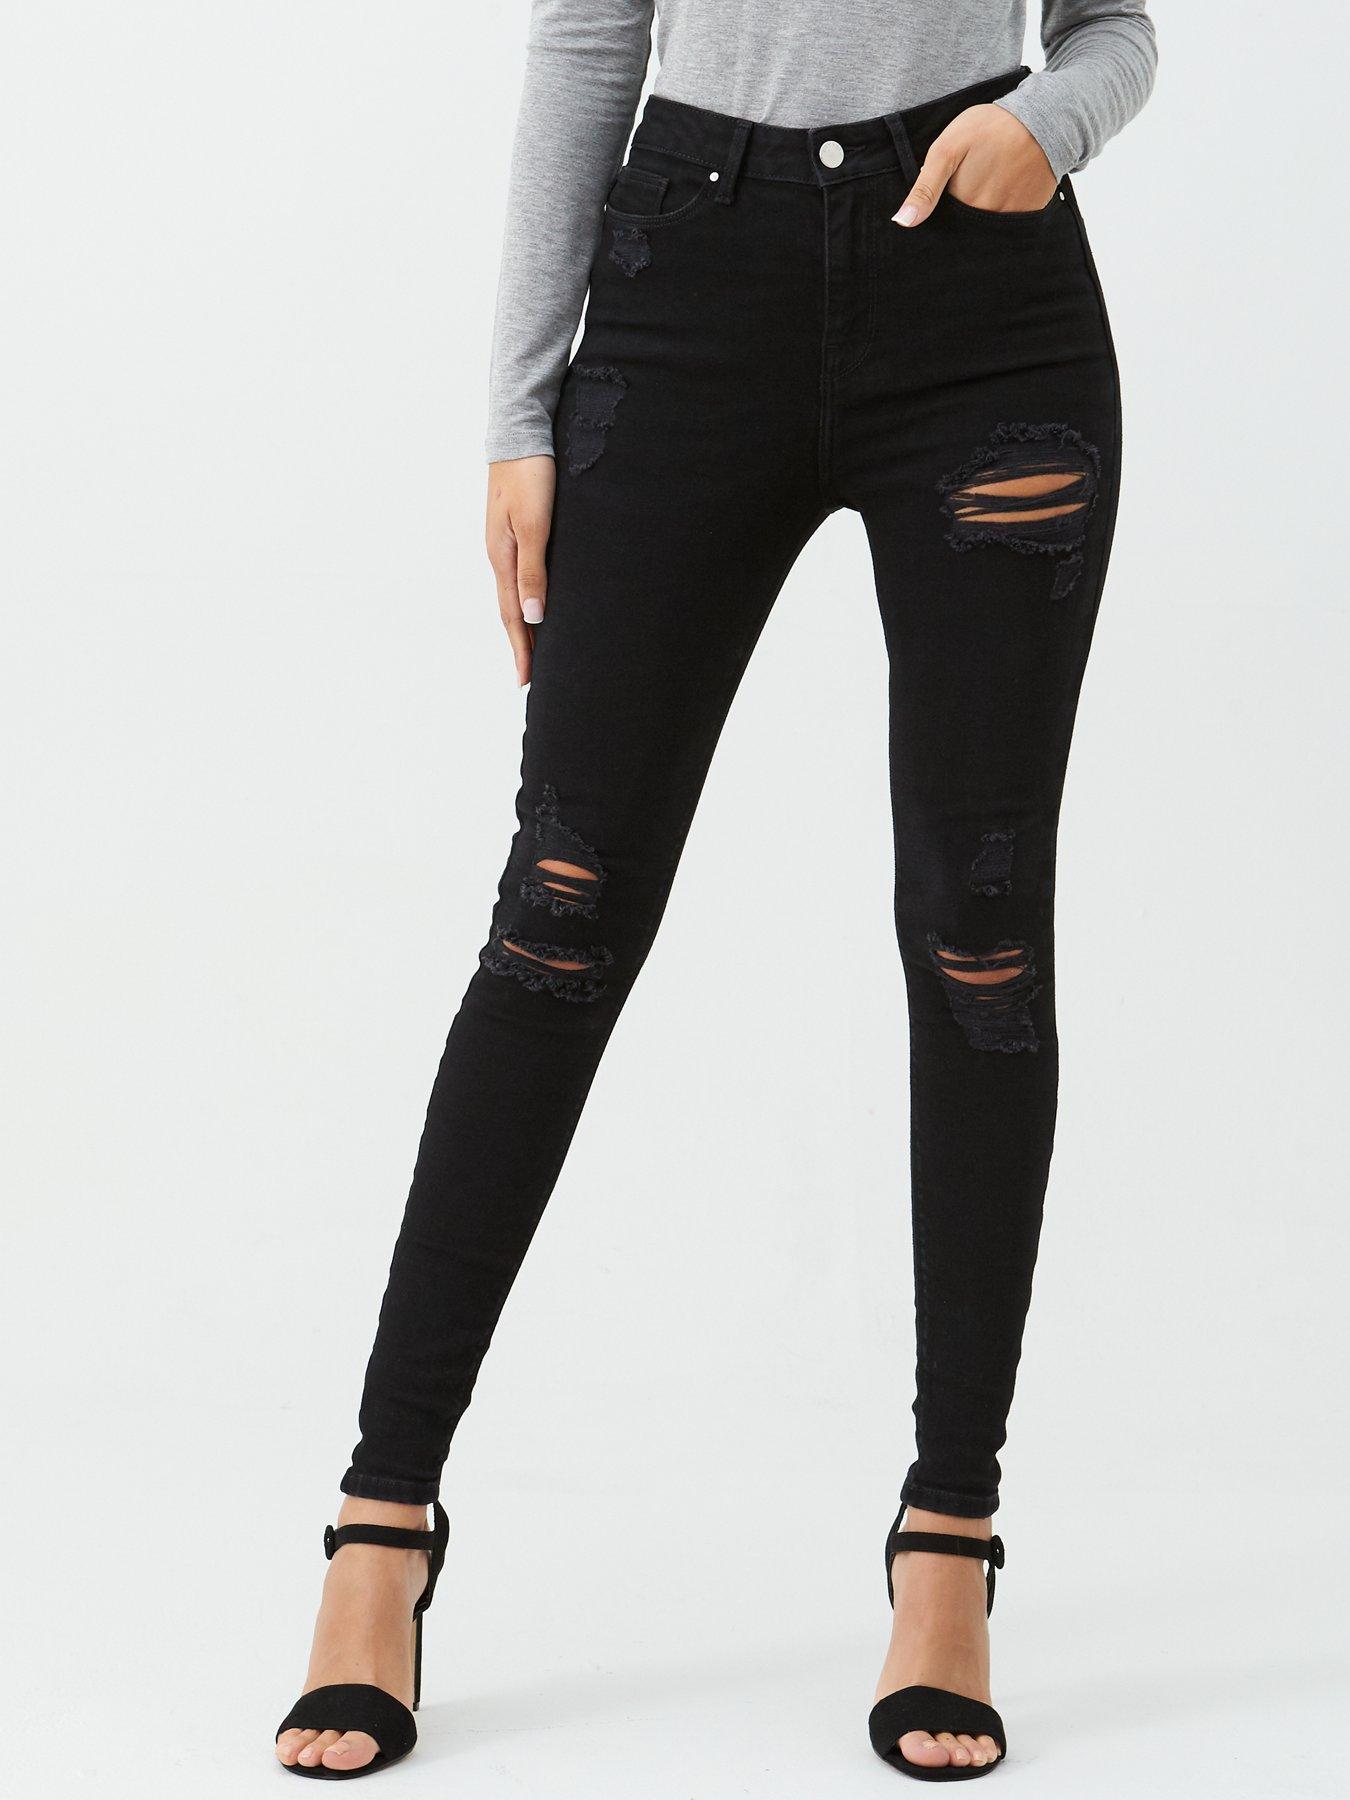 high waisted black distressed skinny jeans